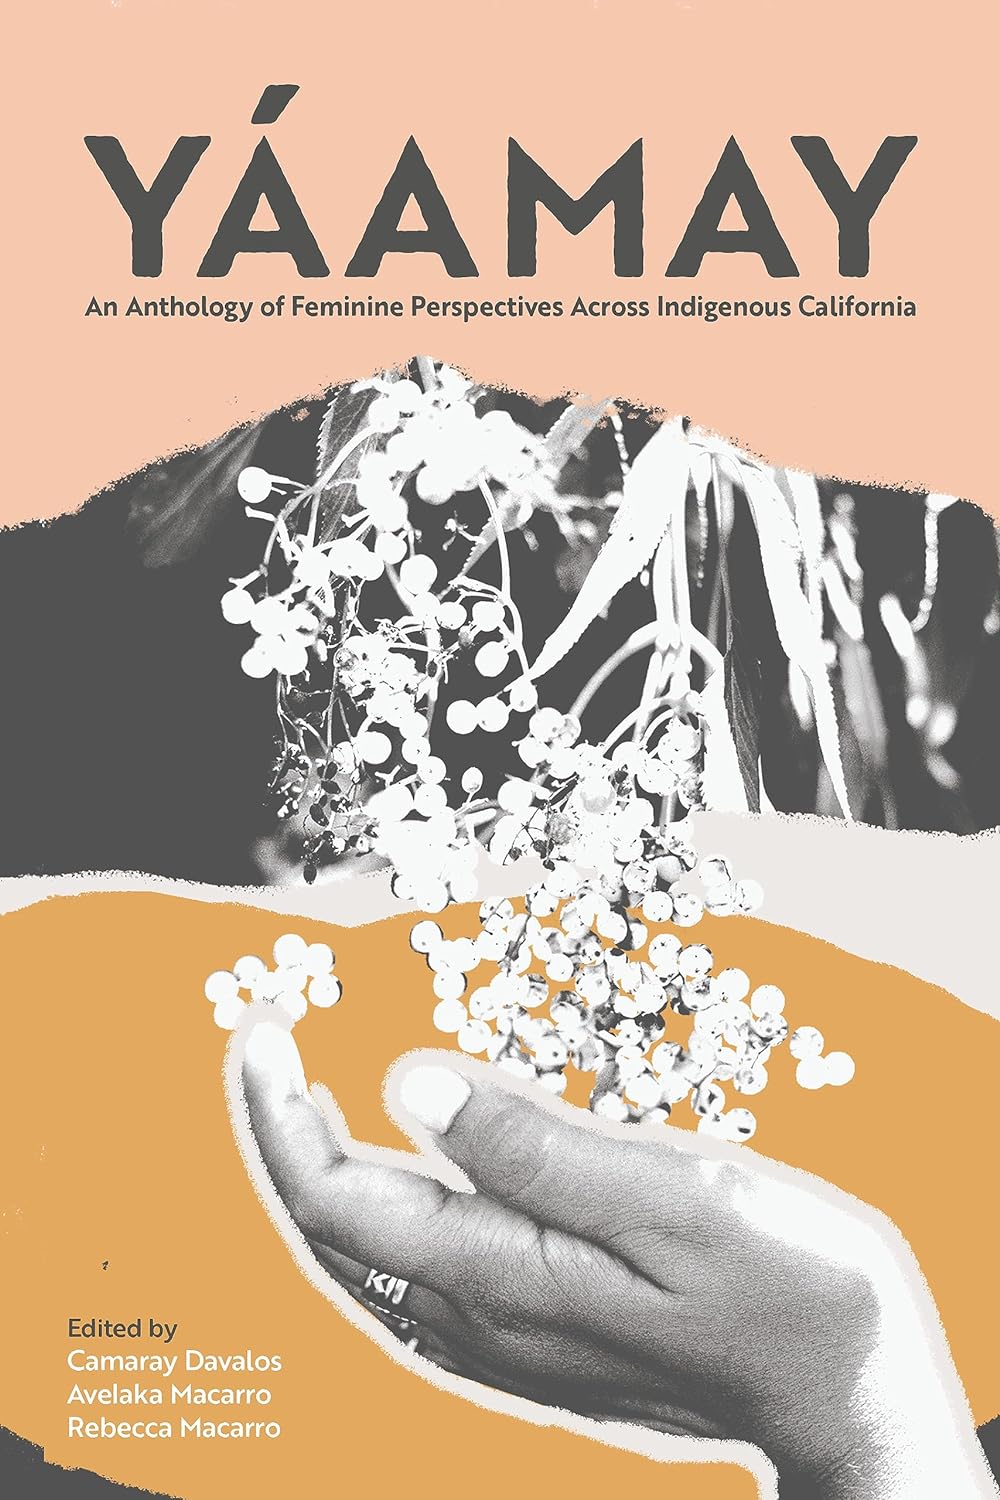 Yáamay: An Anthology of Feminine Perspectives Across Indigenous California edited by Camaray Davalos et al.